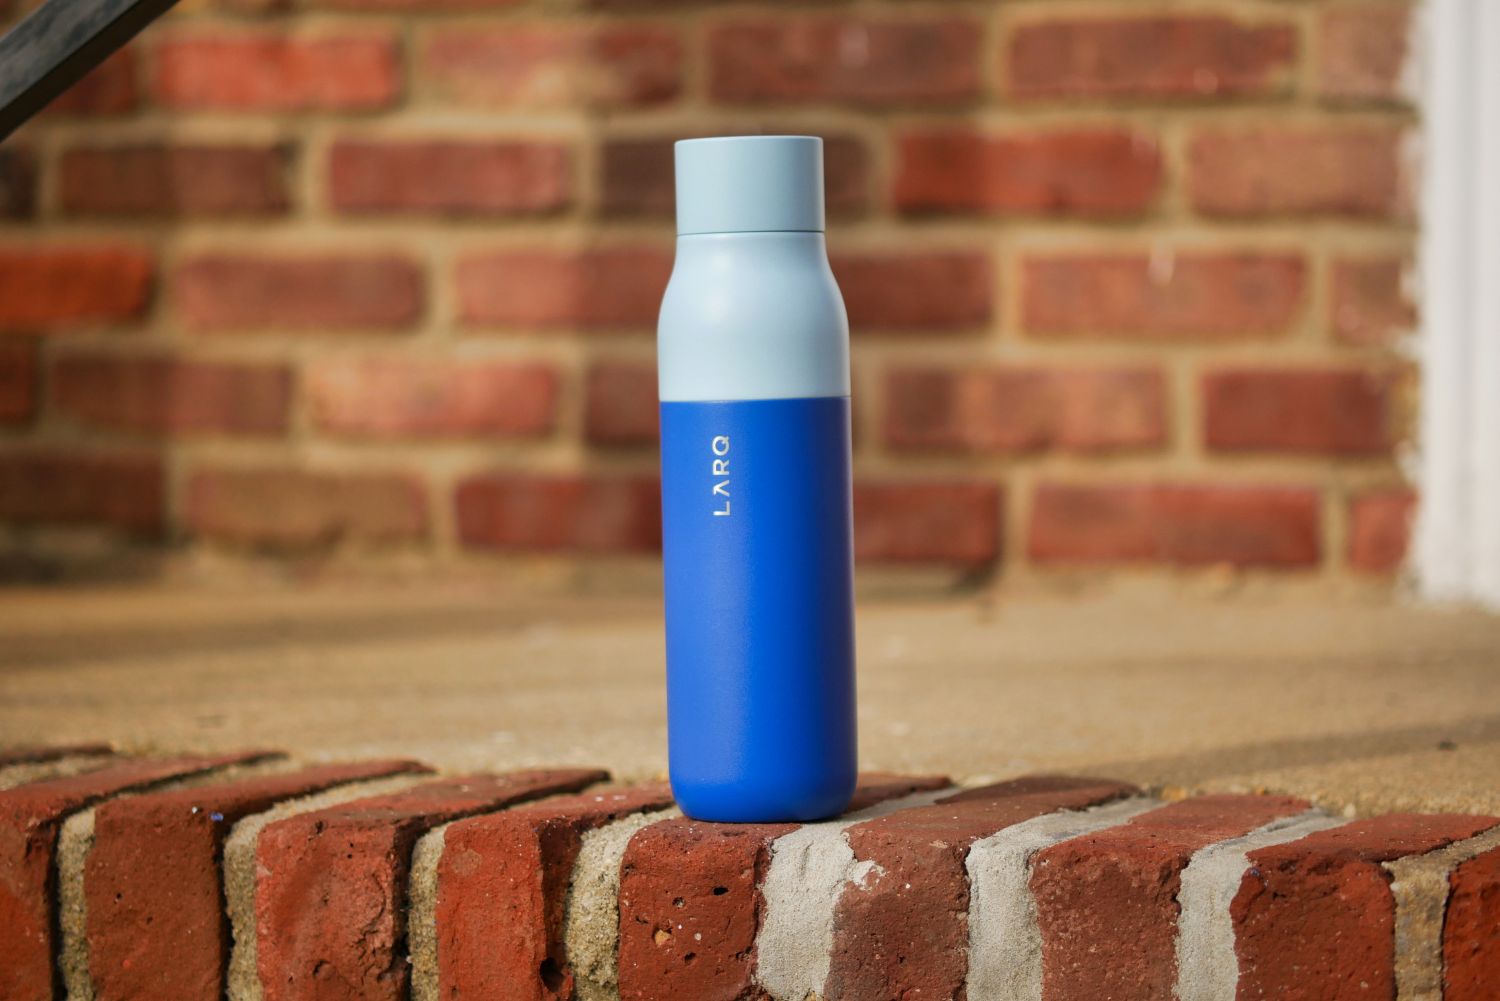 Larq Reusable Bottle Made Me Realize How Much Money I Wasted